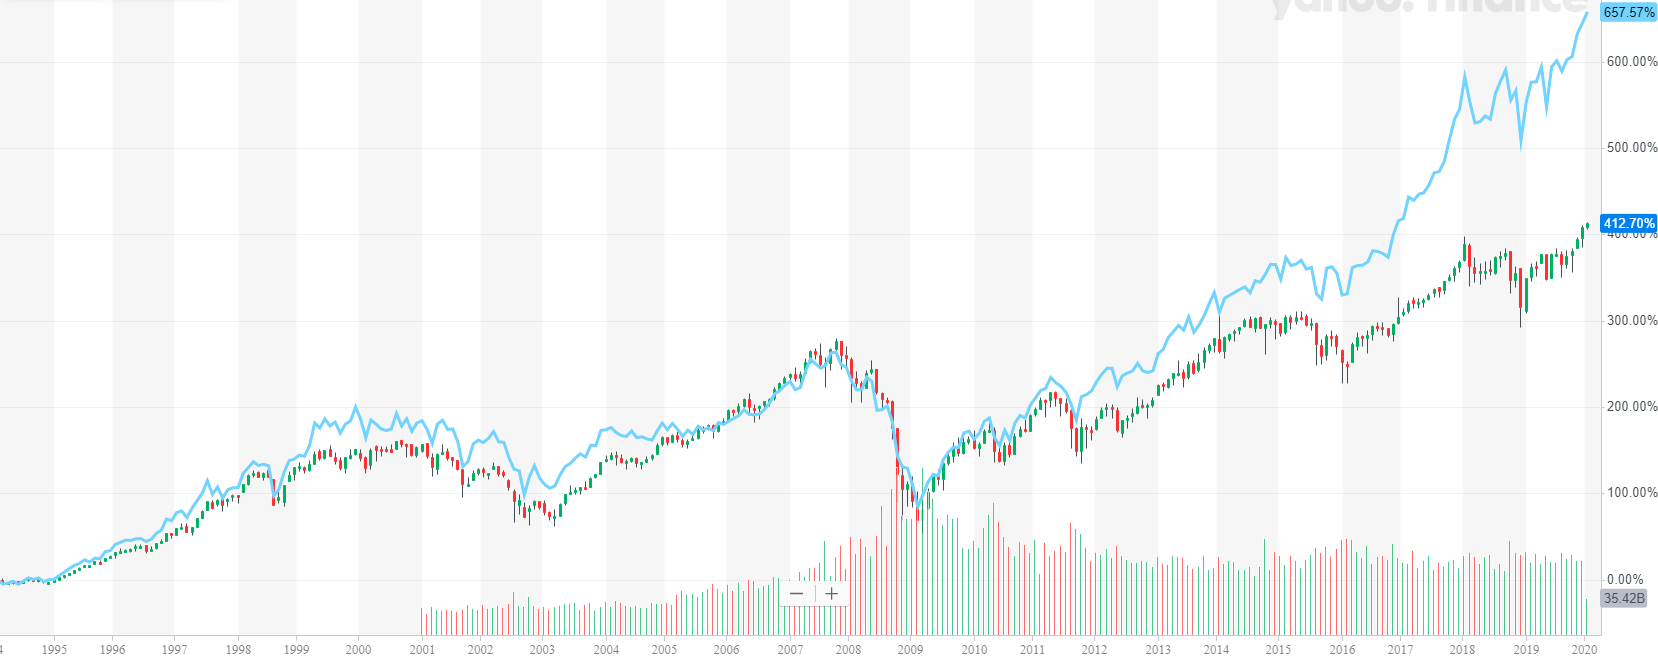 NYSE Composite Index vs Dow